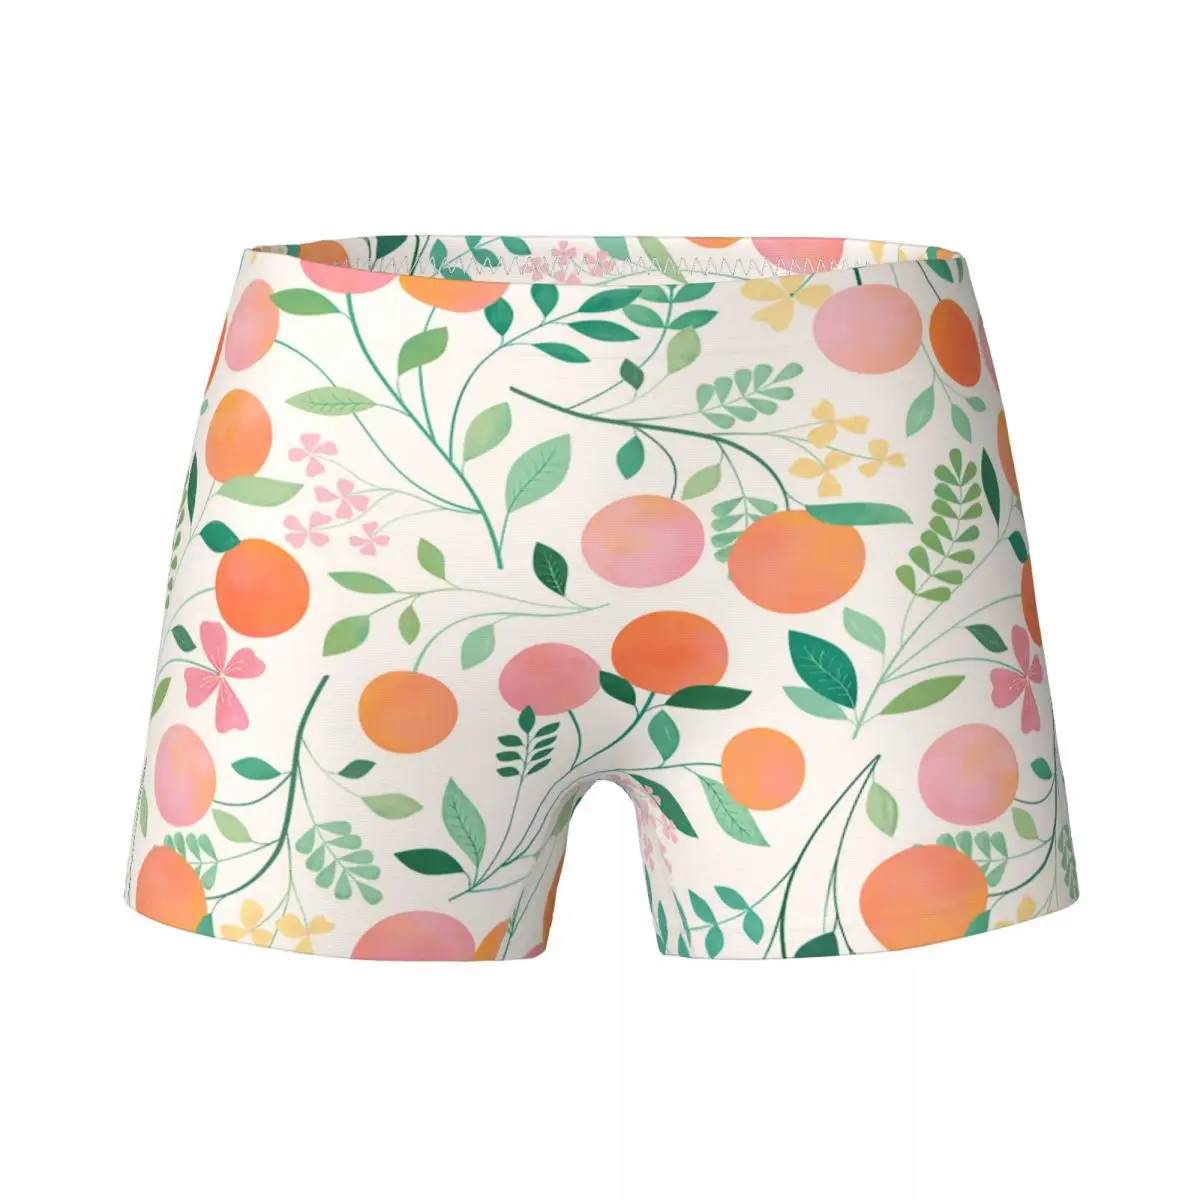 

Young Girls Flower Green Leaves Peach Boxers Children's Cotton Underwear Teenagers Cute Fruit Underpants Breathable Shorts 4-15Y